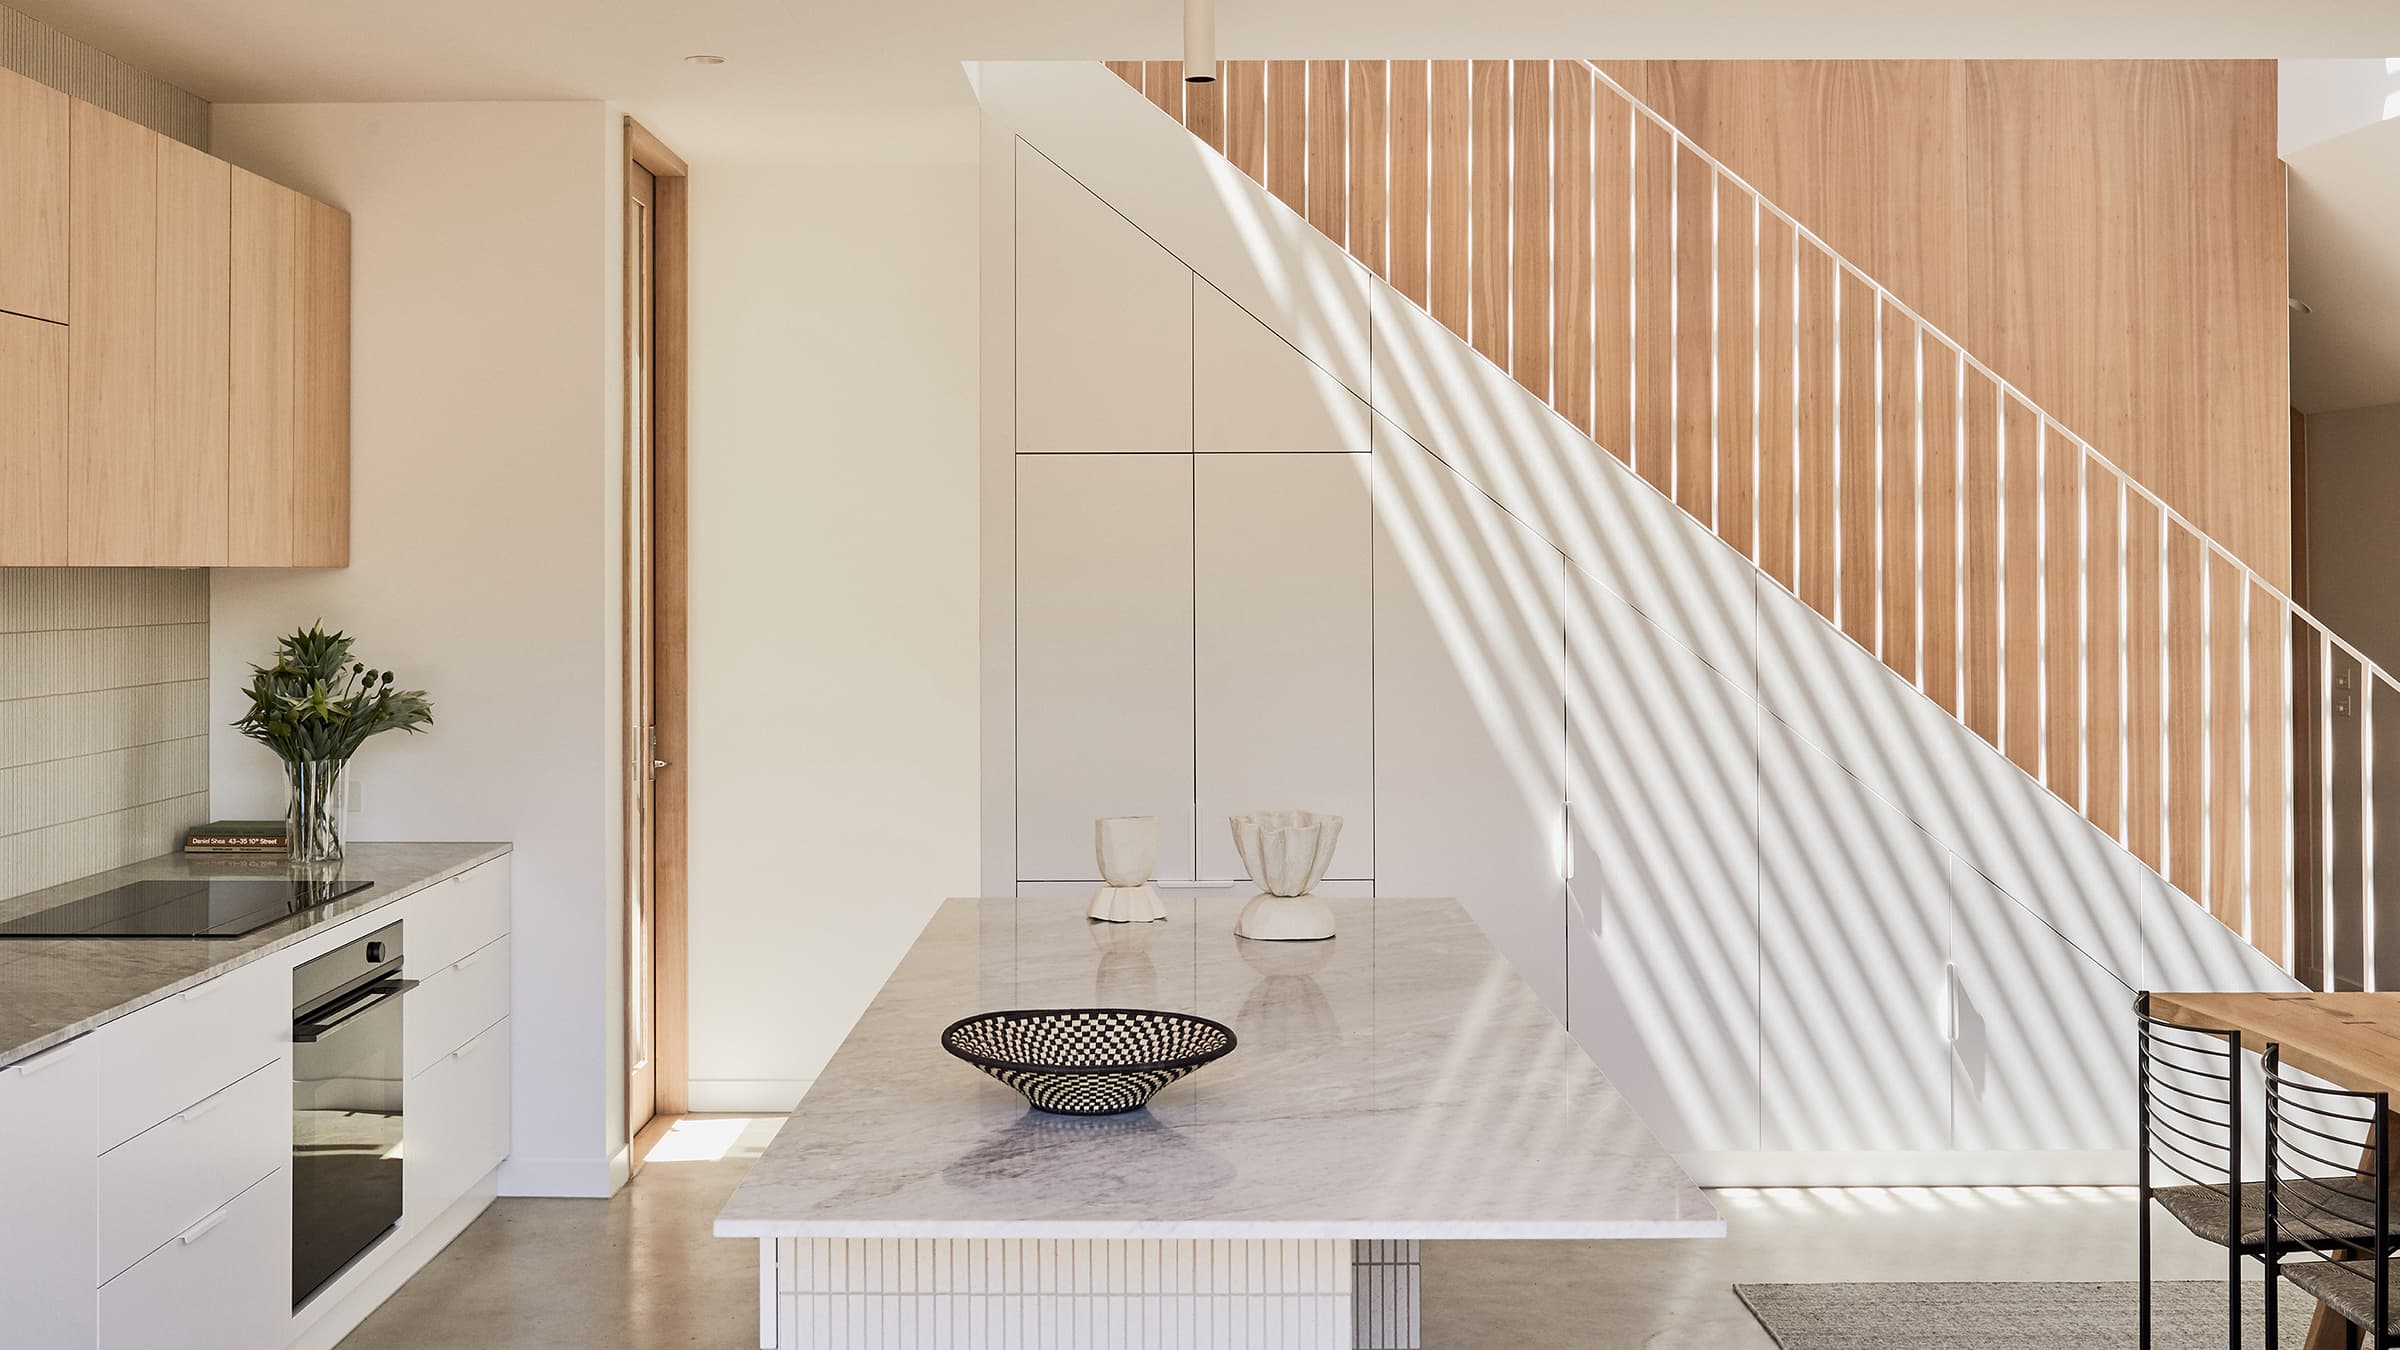 Side shot of the kitchen and ascending staircase, showcasing the minimal style